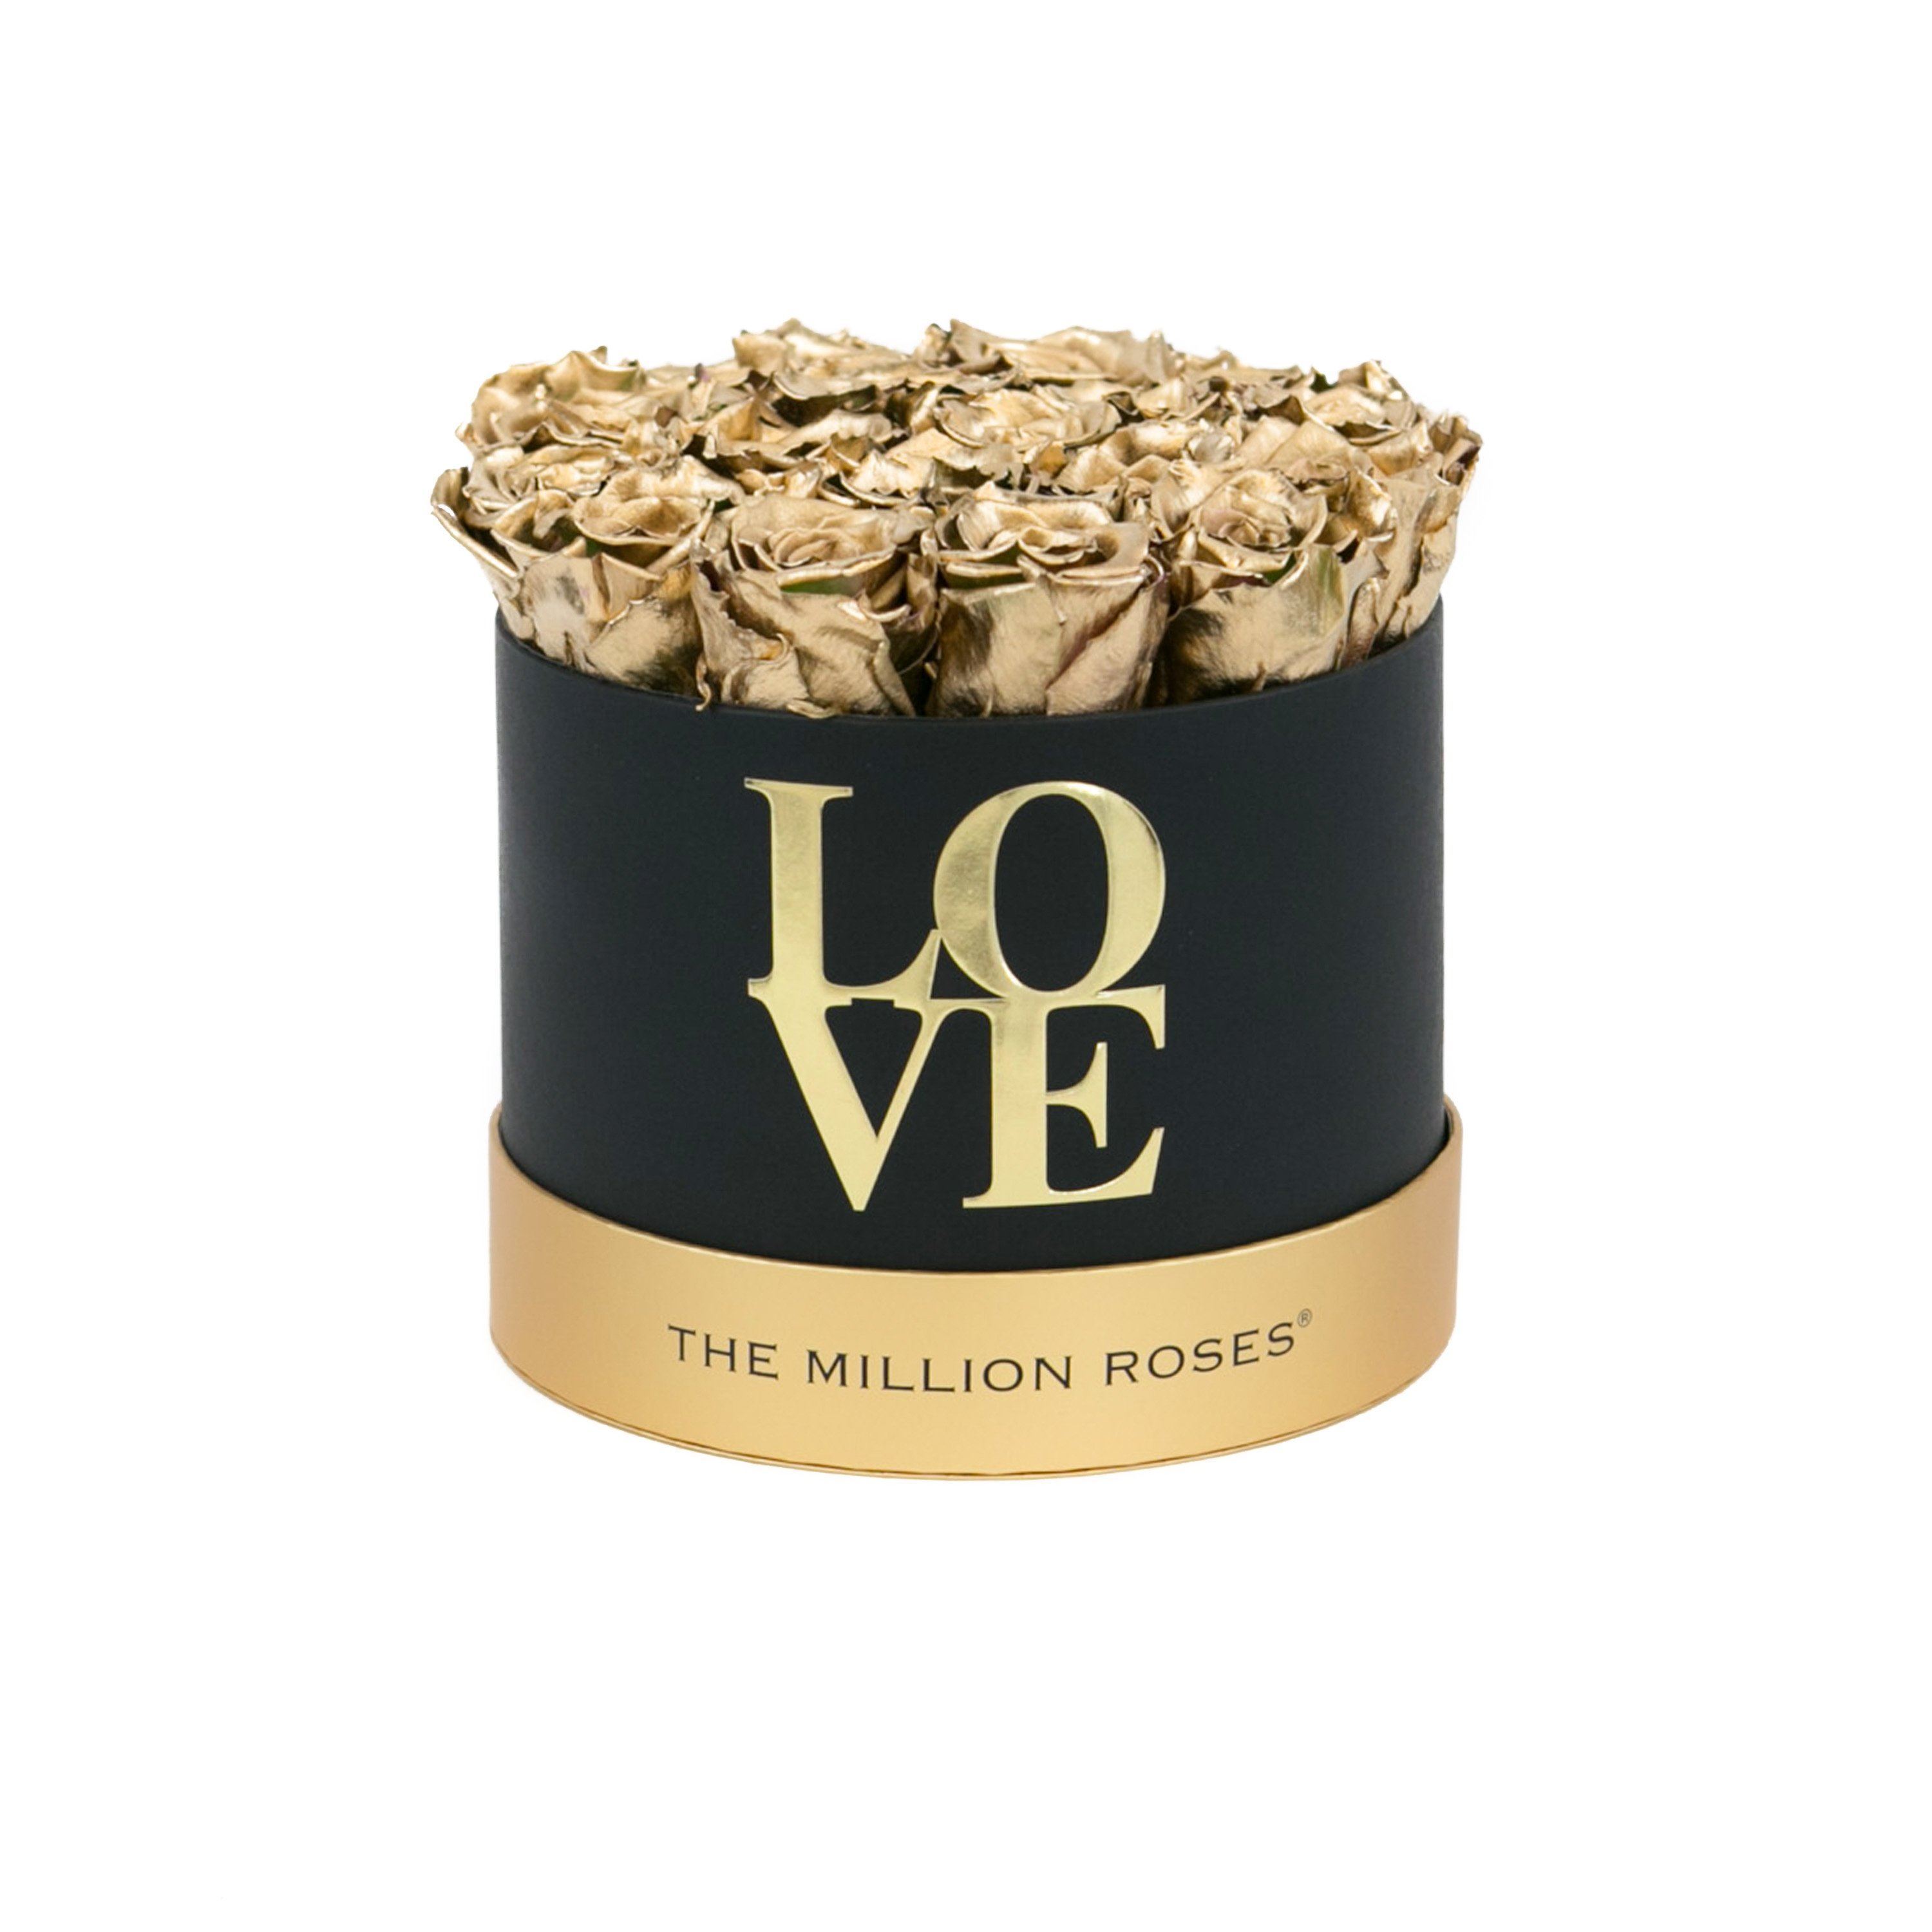 classic round box - "LOVE" - gold roses gold eternity roses - the million roses